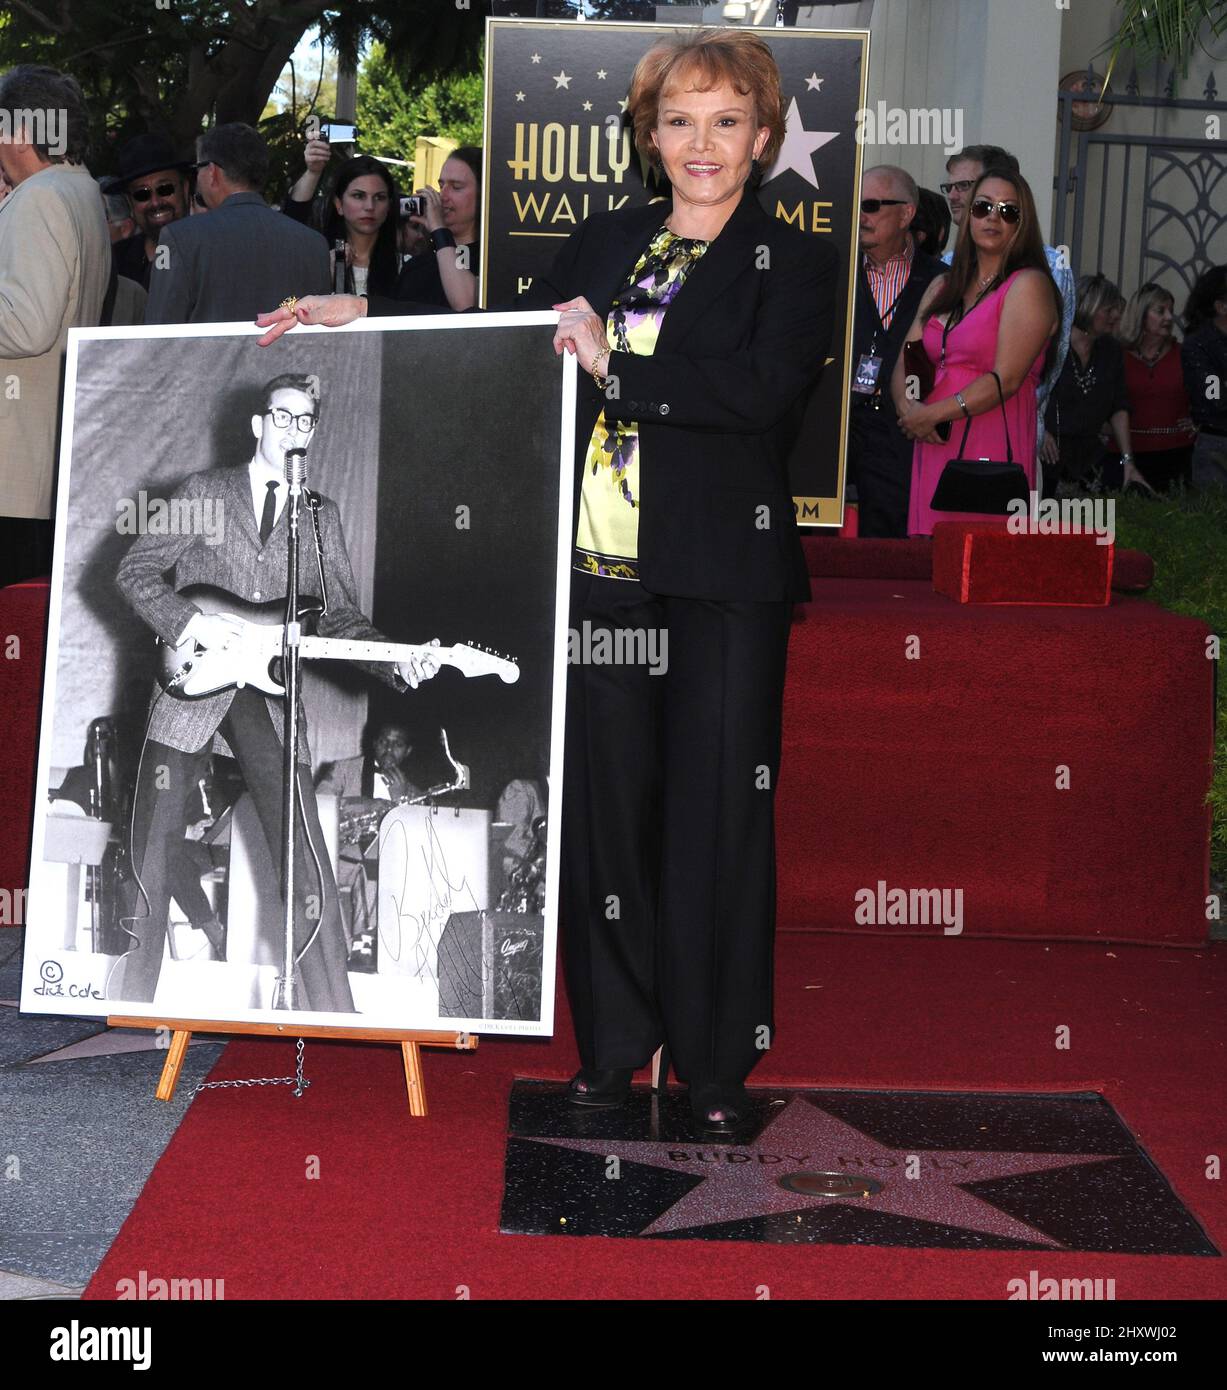 Maria Elena Holly poses as Buddy Holly is honored on the Hollywood Walk of Fame in front of the Capital Records Building, Hollywood, California on September 07, 2011. Stock Photo